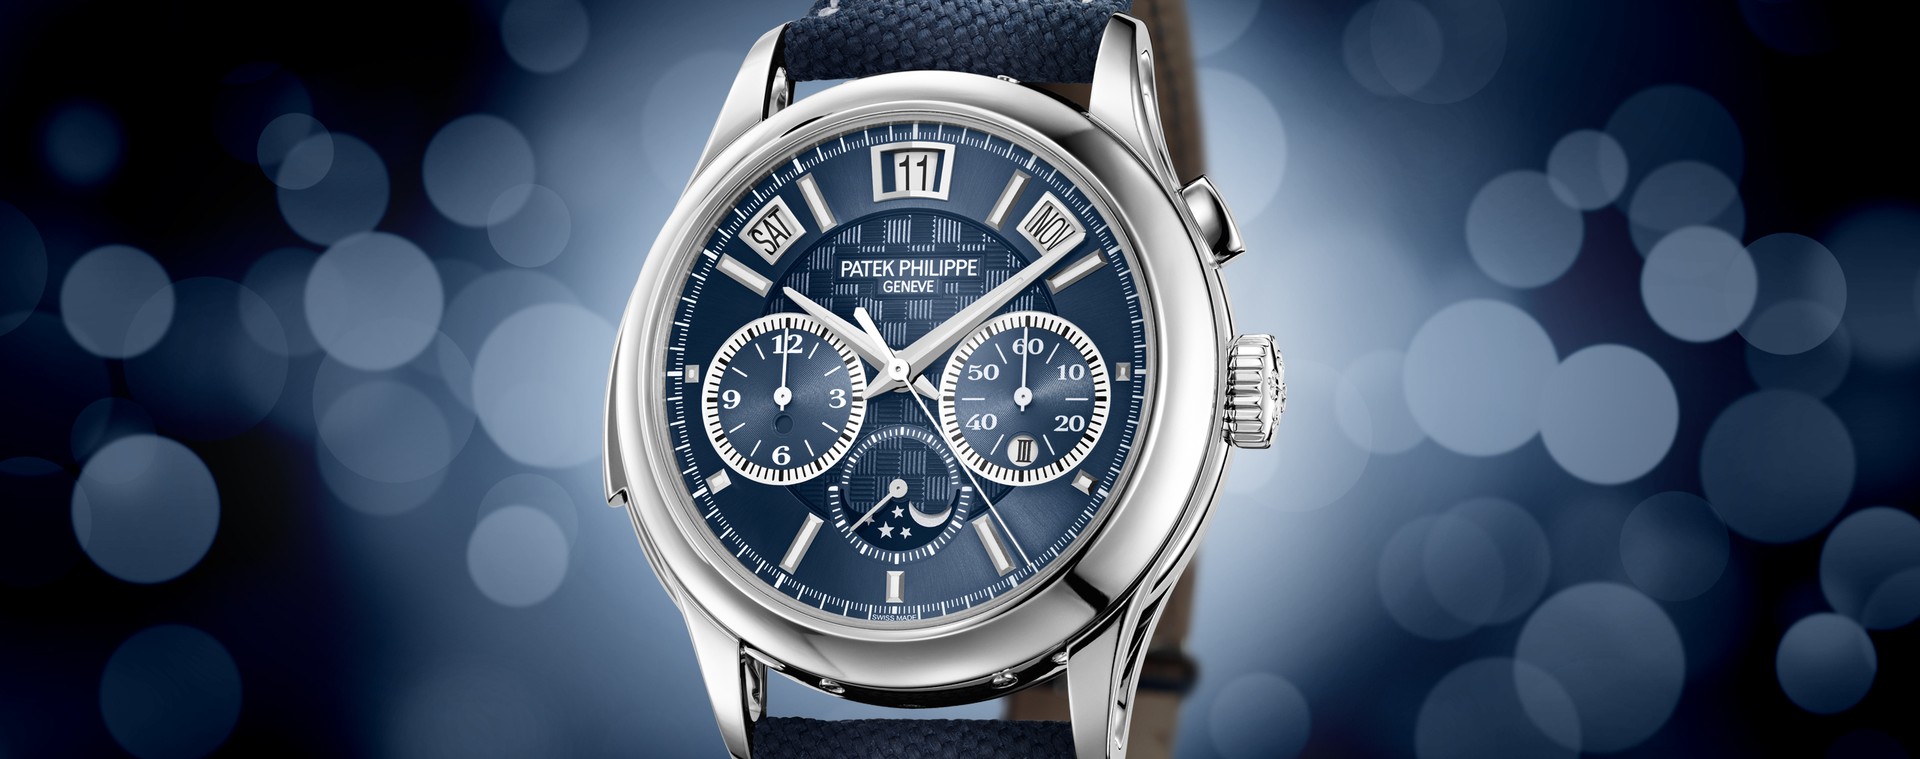 Breguet Tradition 7067 Replica With Swiss Movement